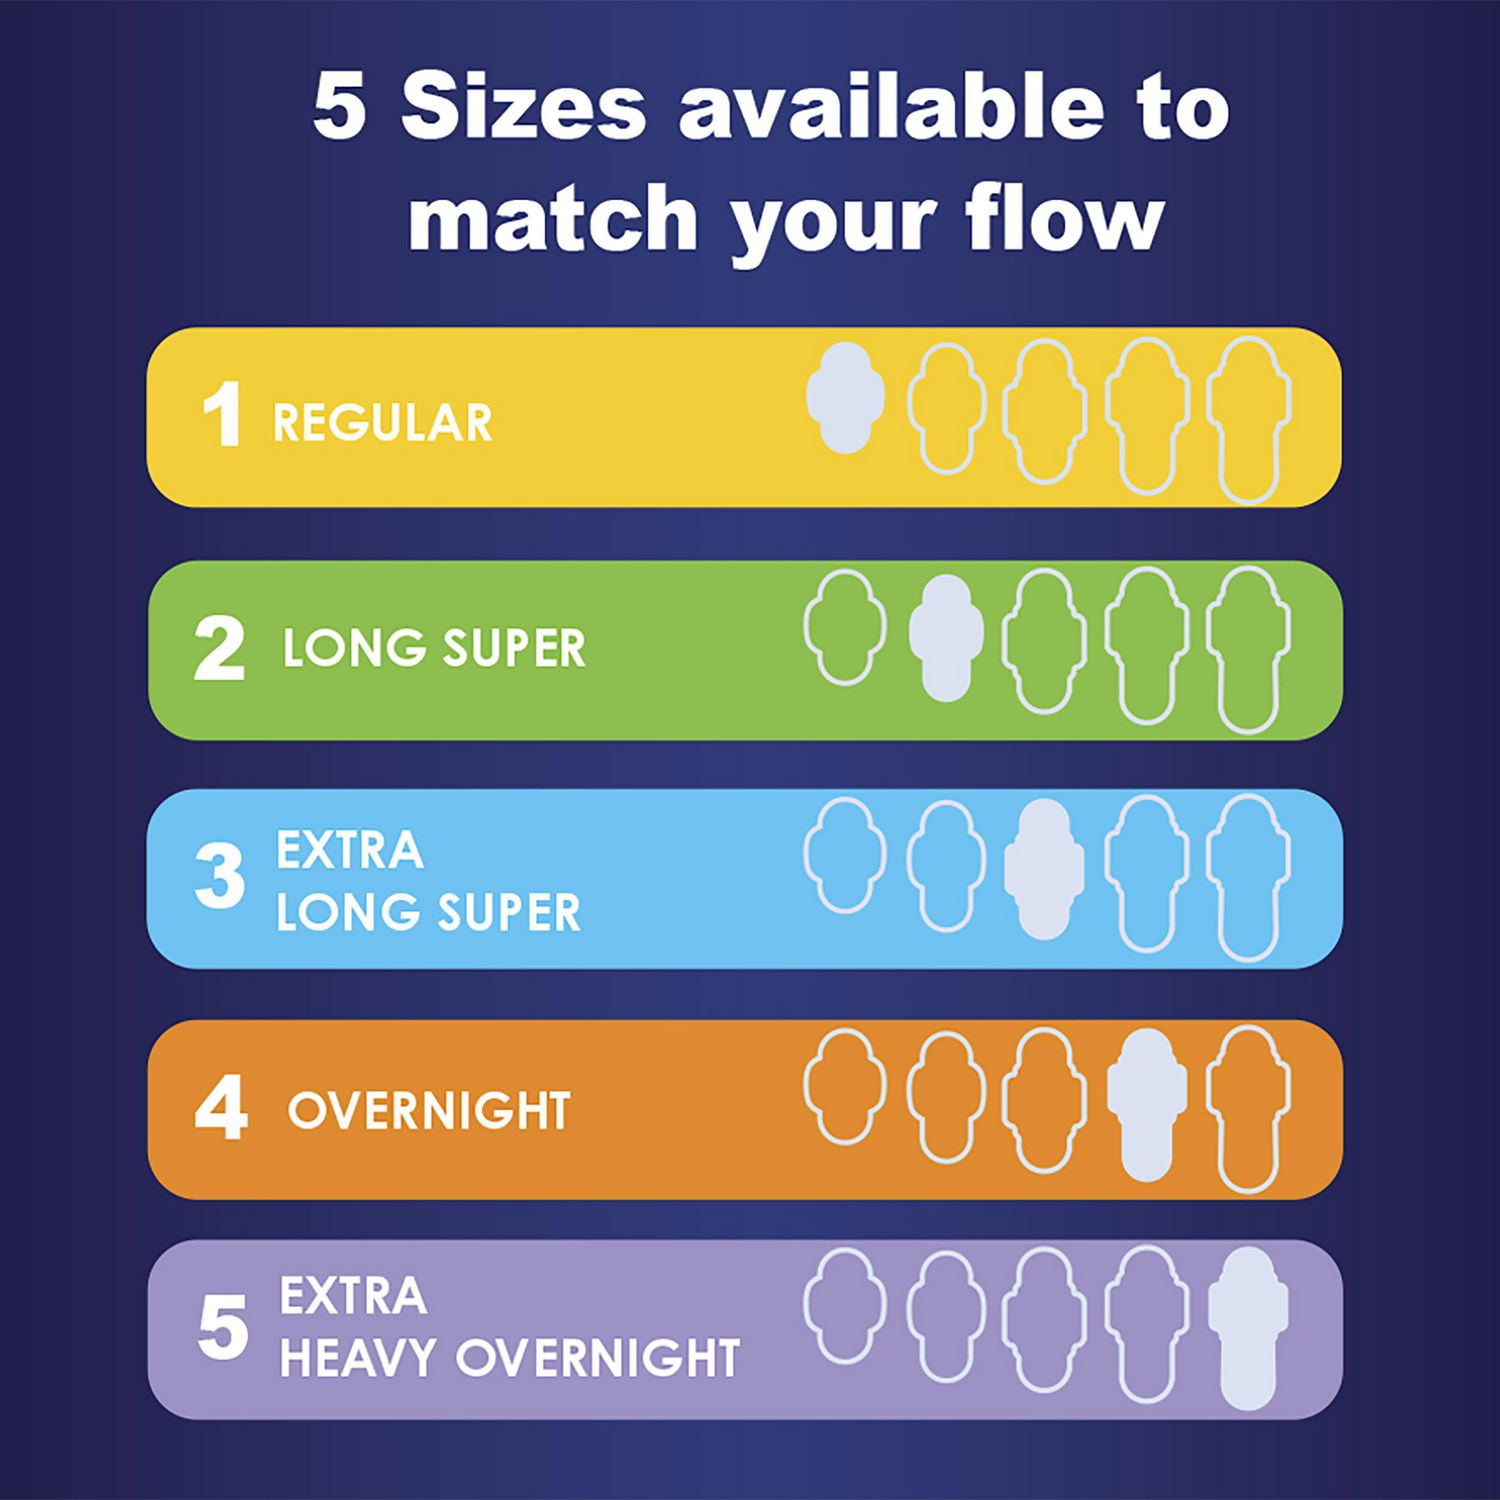 Equate Overnight Extra Heavy Flow Maxi Pads with Flexi-Wings®, 36